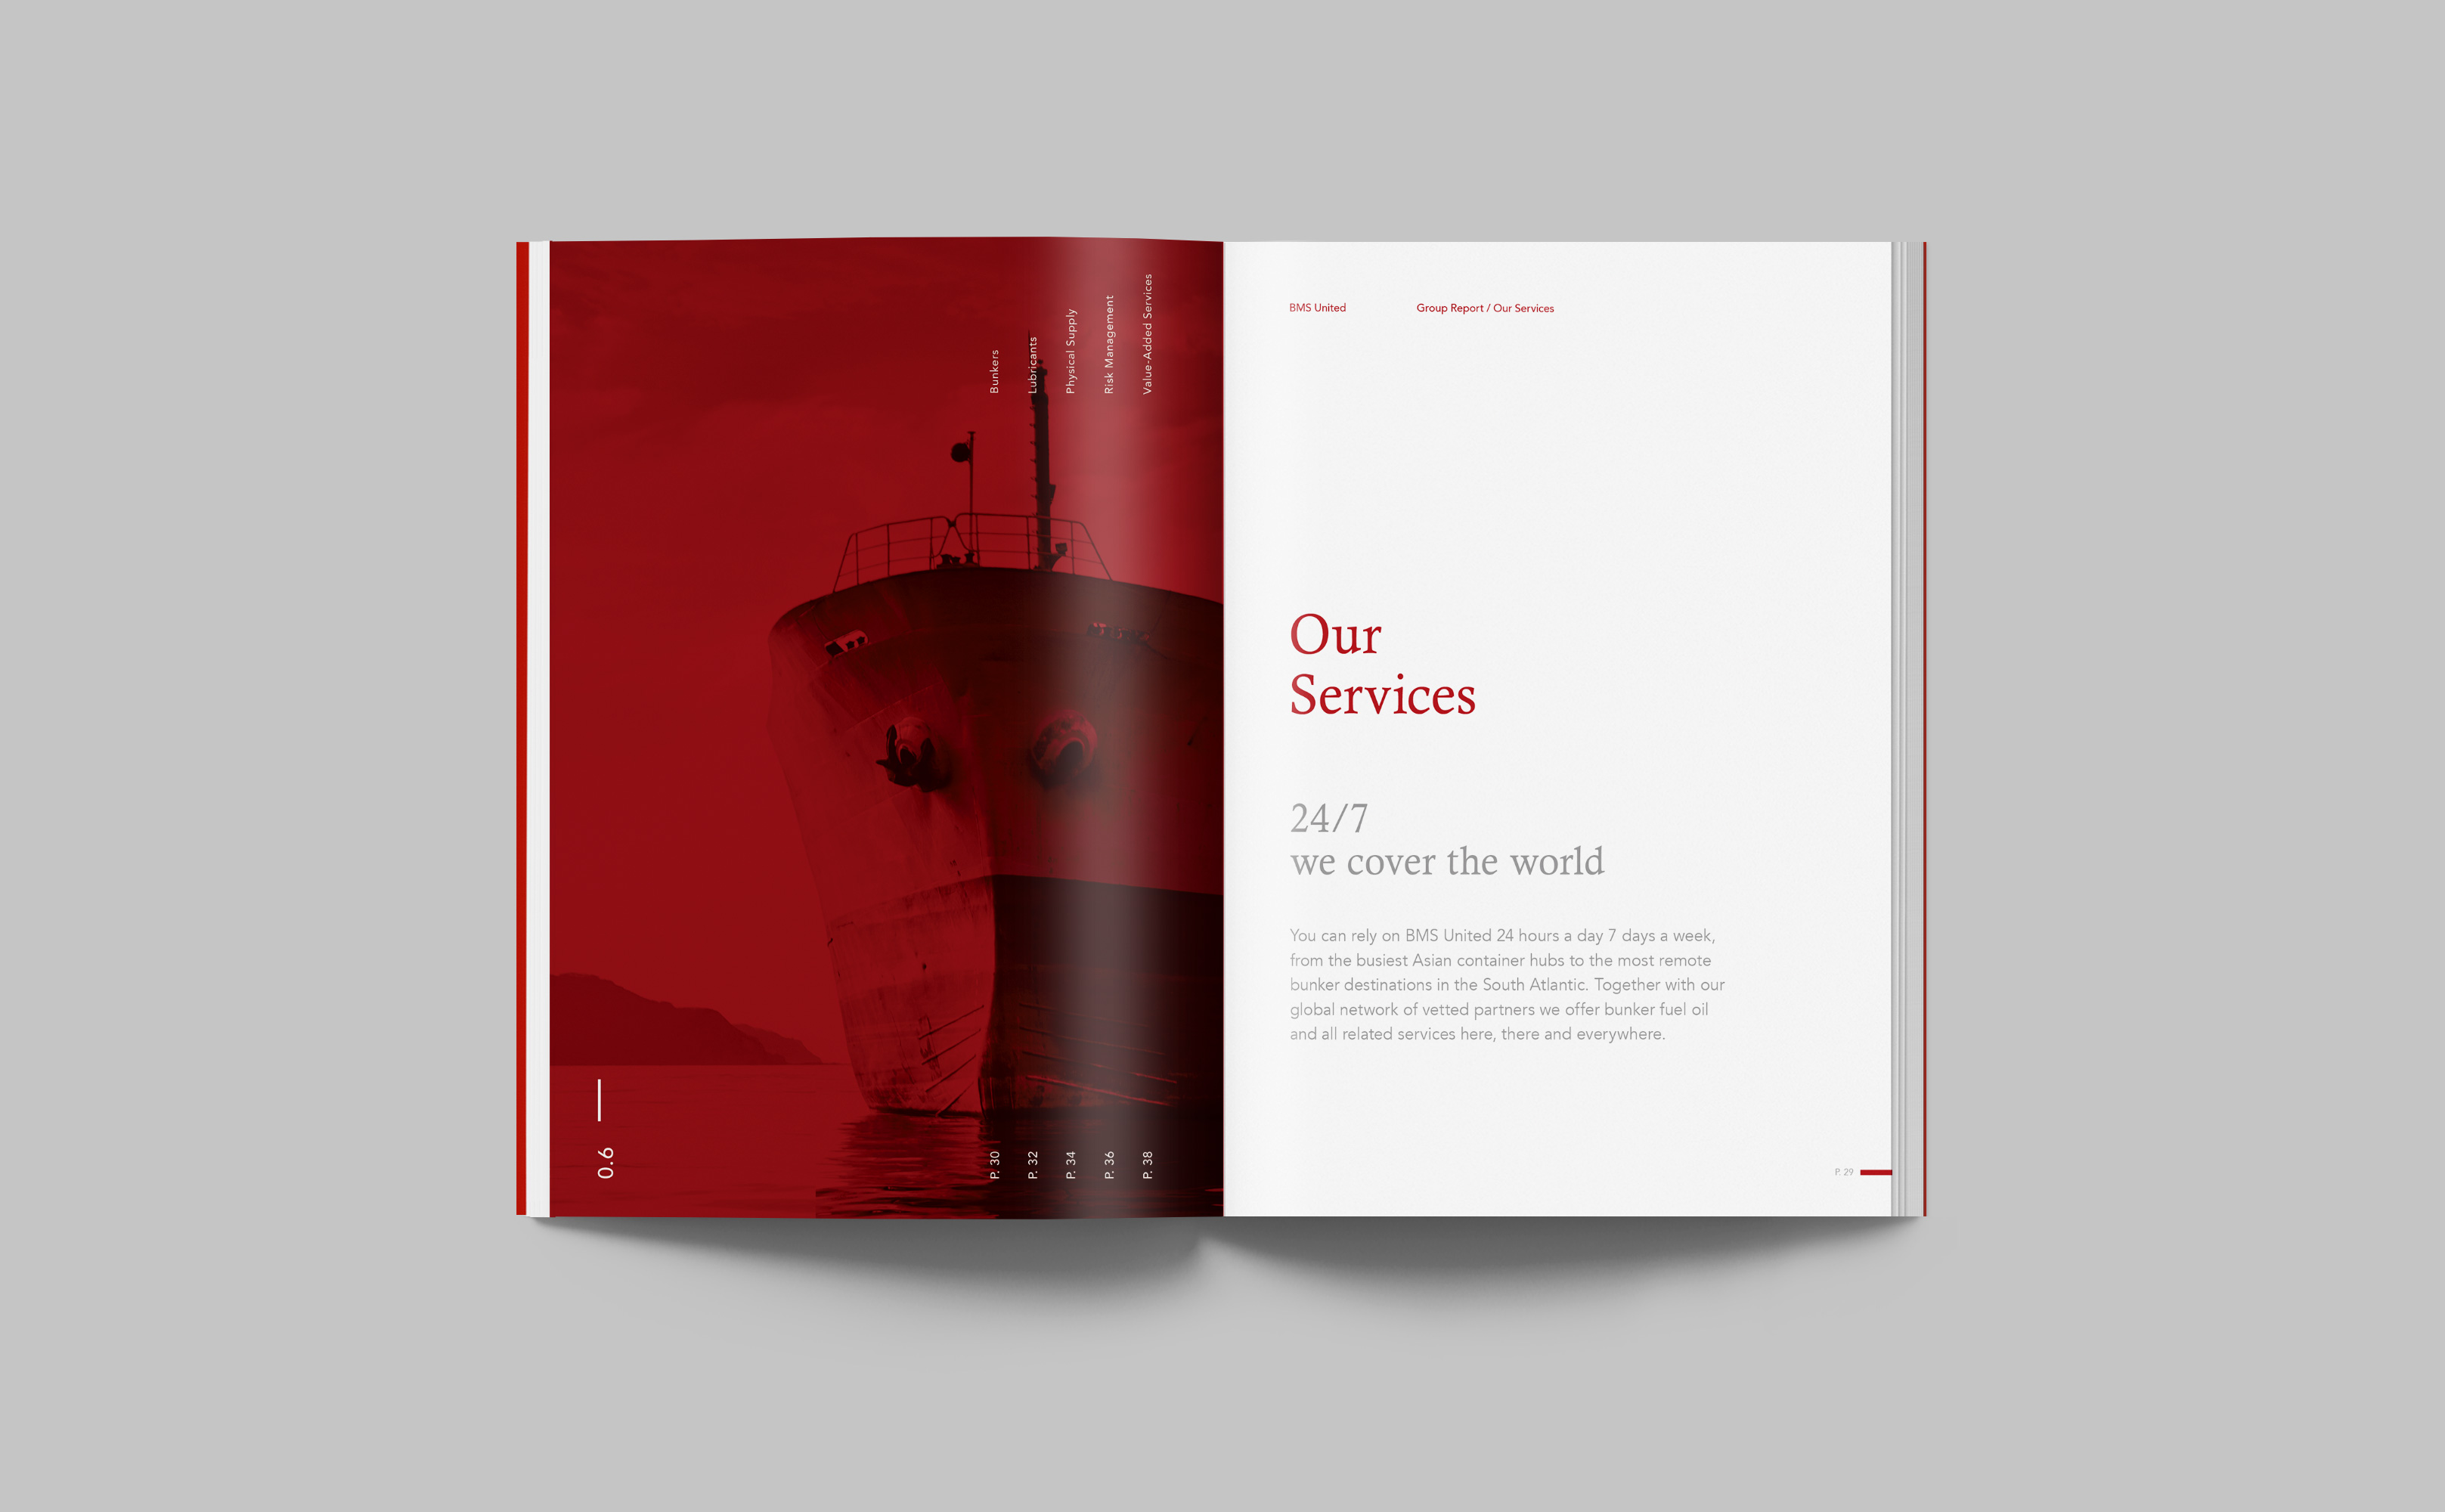 bms united branding brochure spreads services kommigraphics